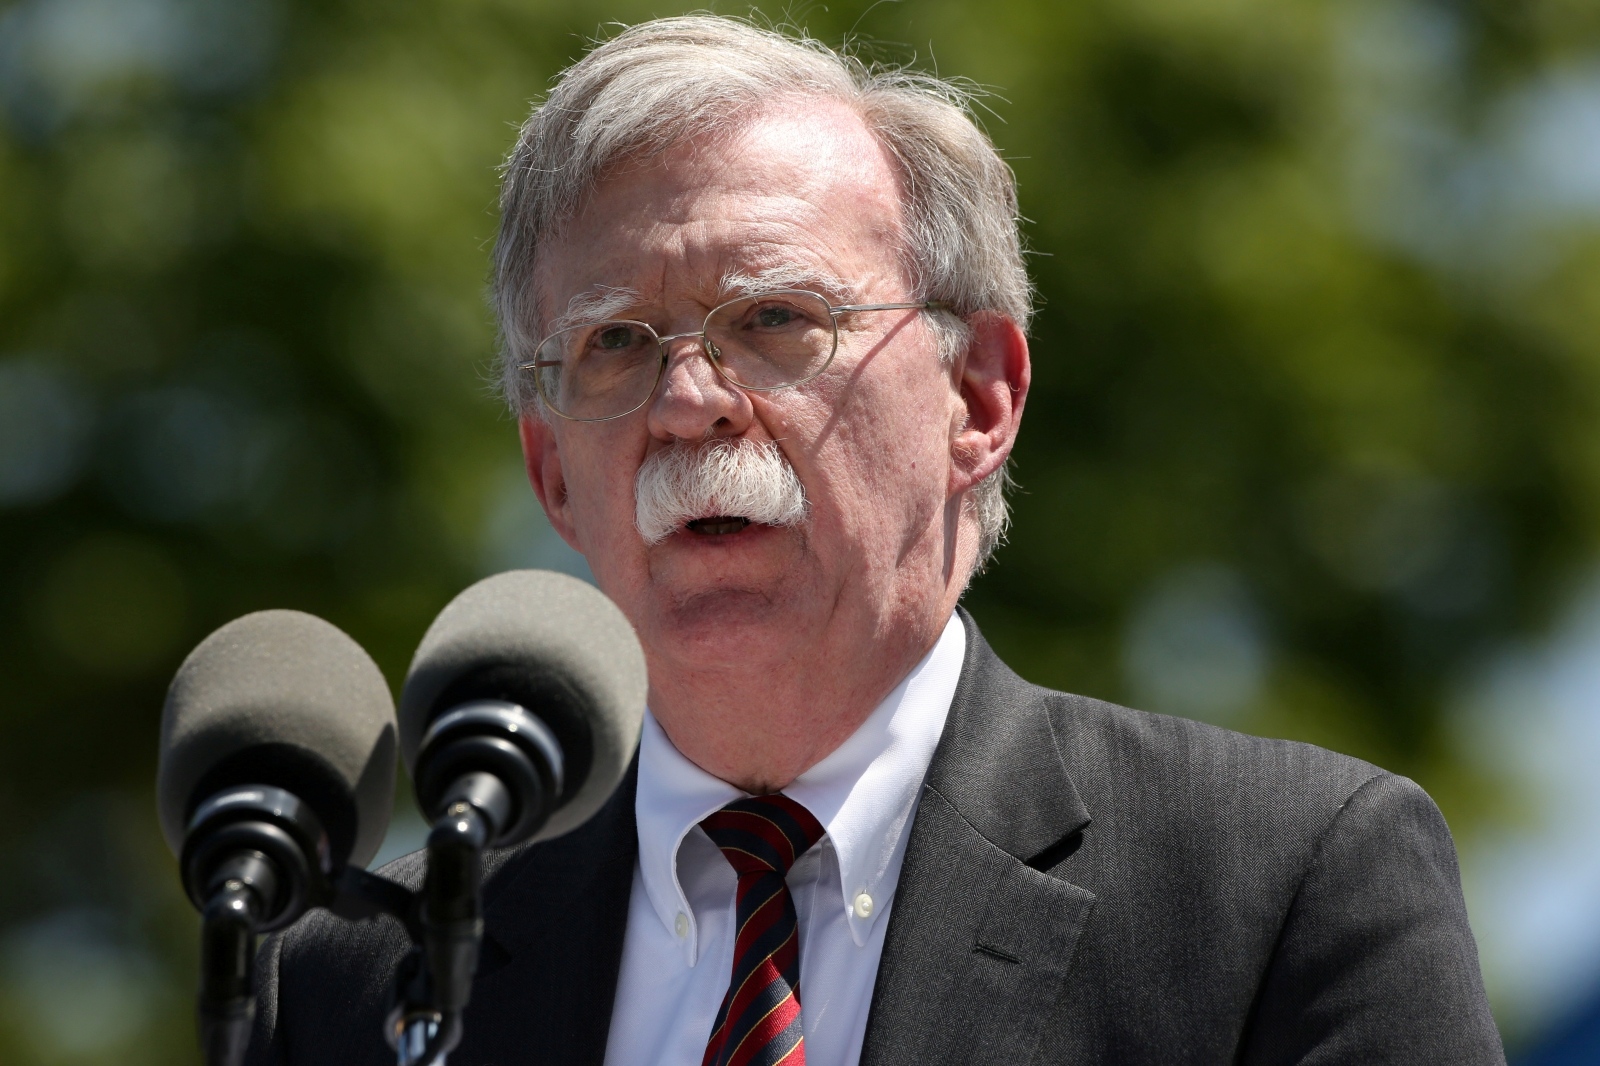 U.S. National Security Advisor John Bolton speaks during a graduation ceremony at the U.S. Coast Guard Academy in New London U.S. National Security Advisor John Bolton speaks during a graduation ceremony at the U.S. Coast Guard Academy in New London, Connecticut, U.S., May 22, 2019.   REUTERS/Michelle McLoughlin MICHELLE MCLOUGHLIN